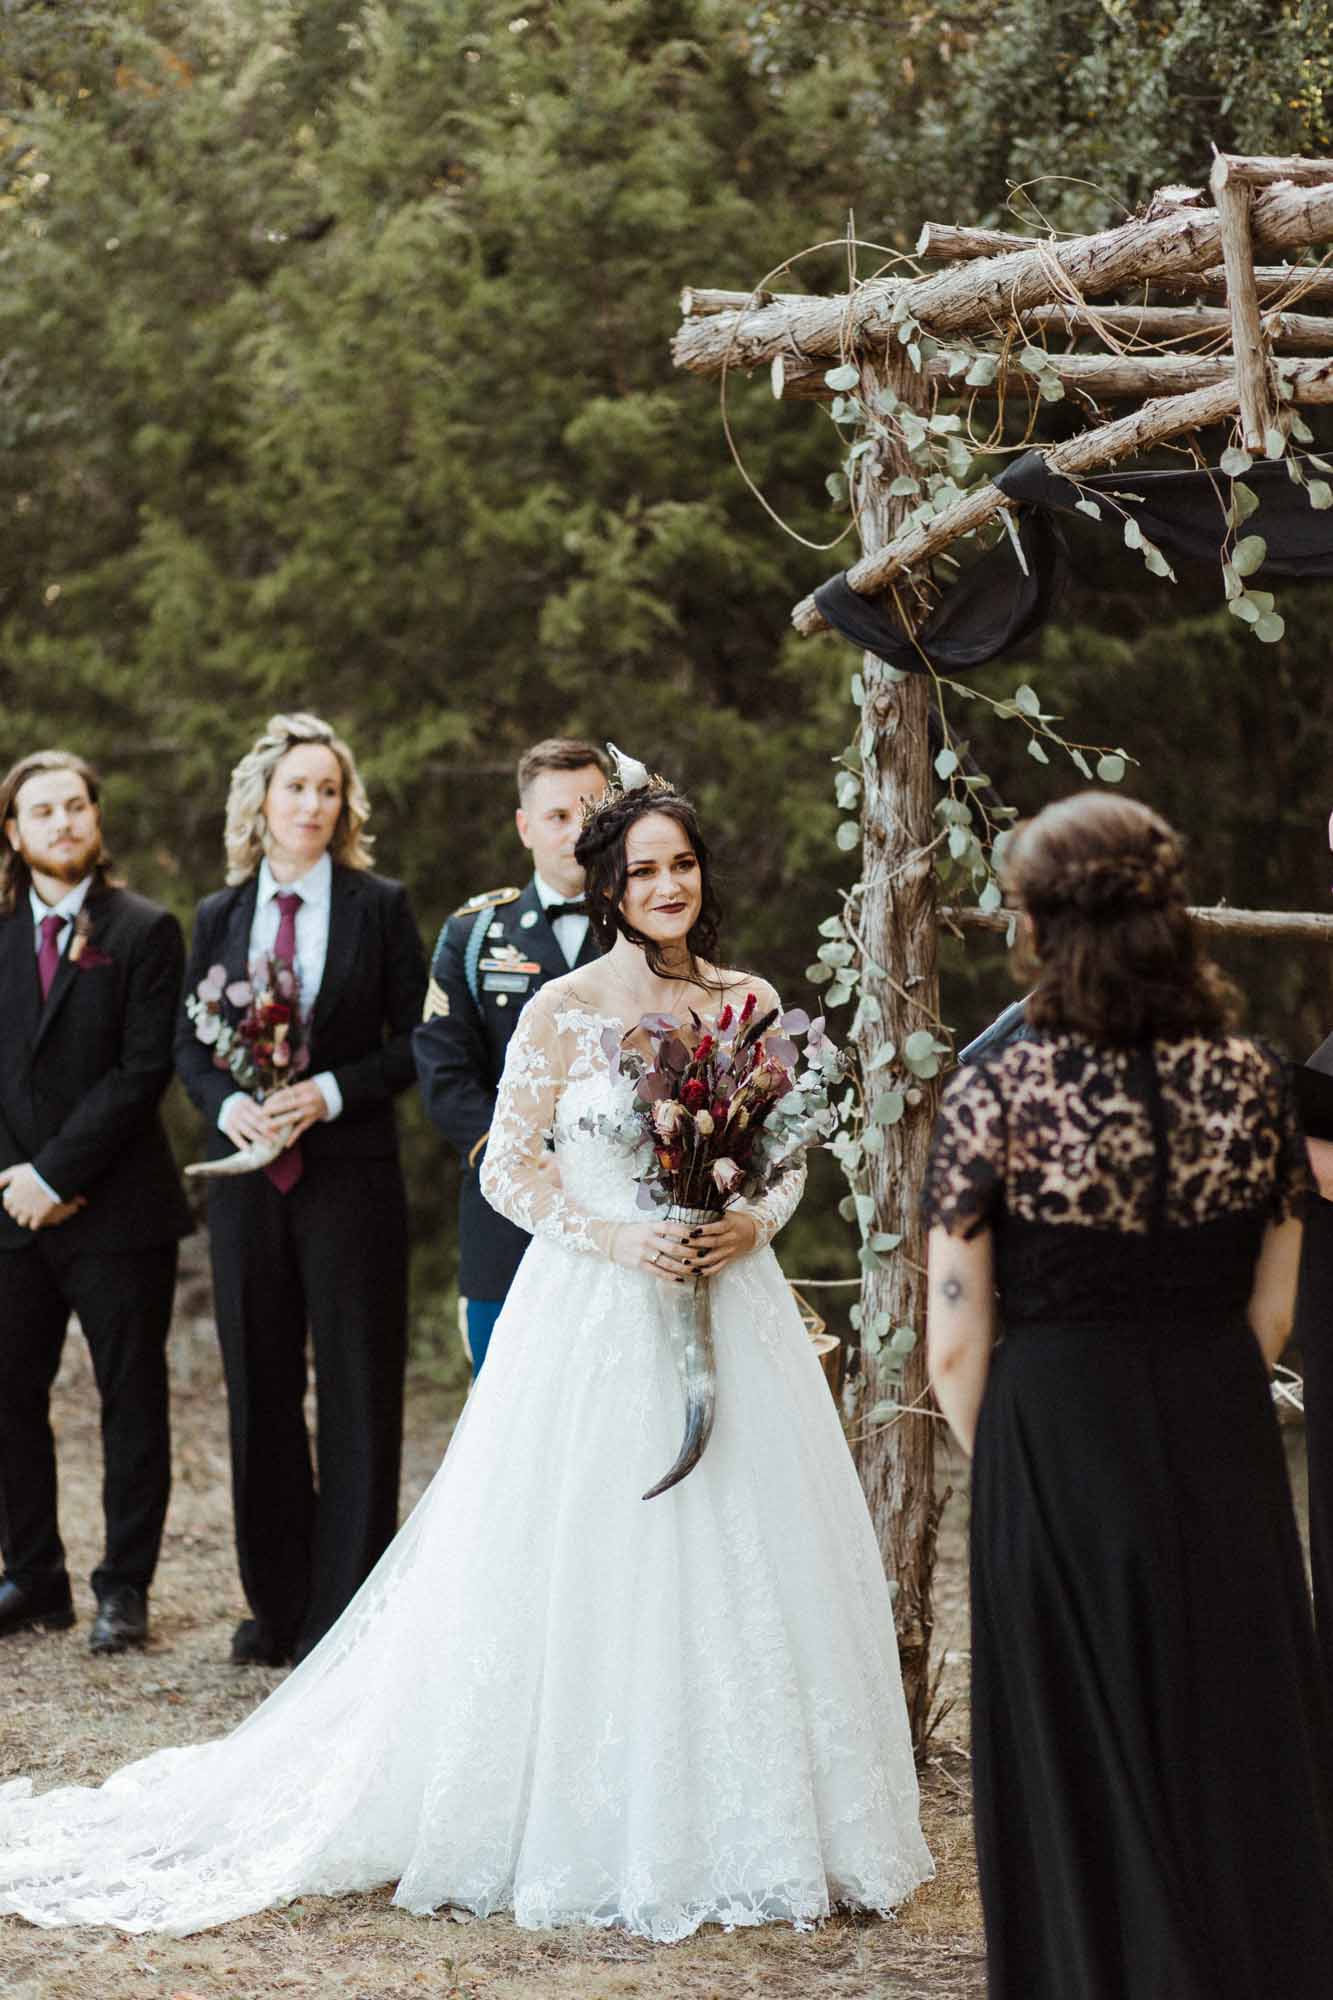 Beautifully gothic Texas wedding with creative details, photo by Leah Thomason Photography, featured on Equally Wed, the LGBTQ+ wedding magazine